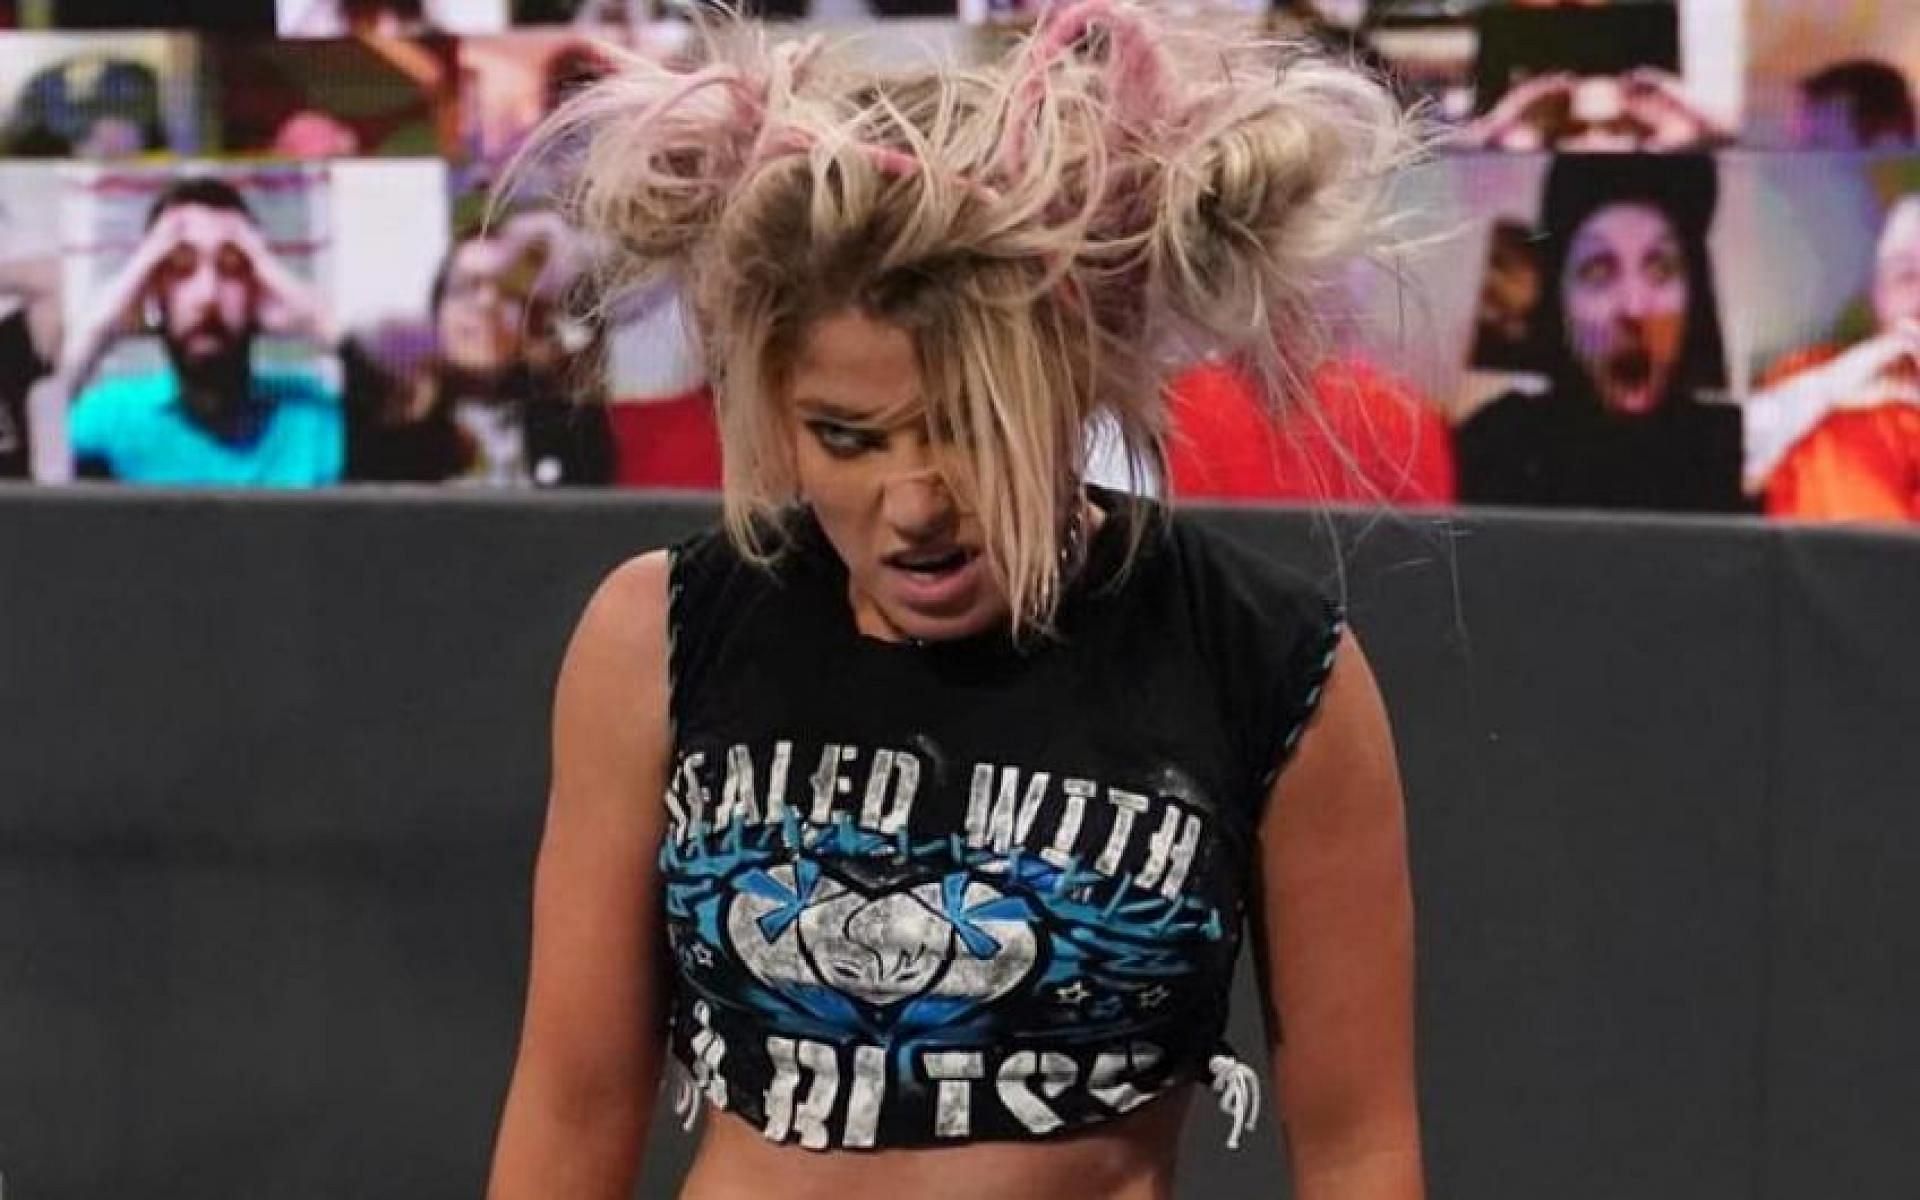 Some storylines with Little Miss Bliss have gotten very personal in WWE.